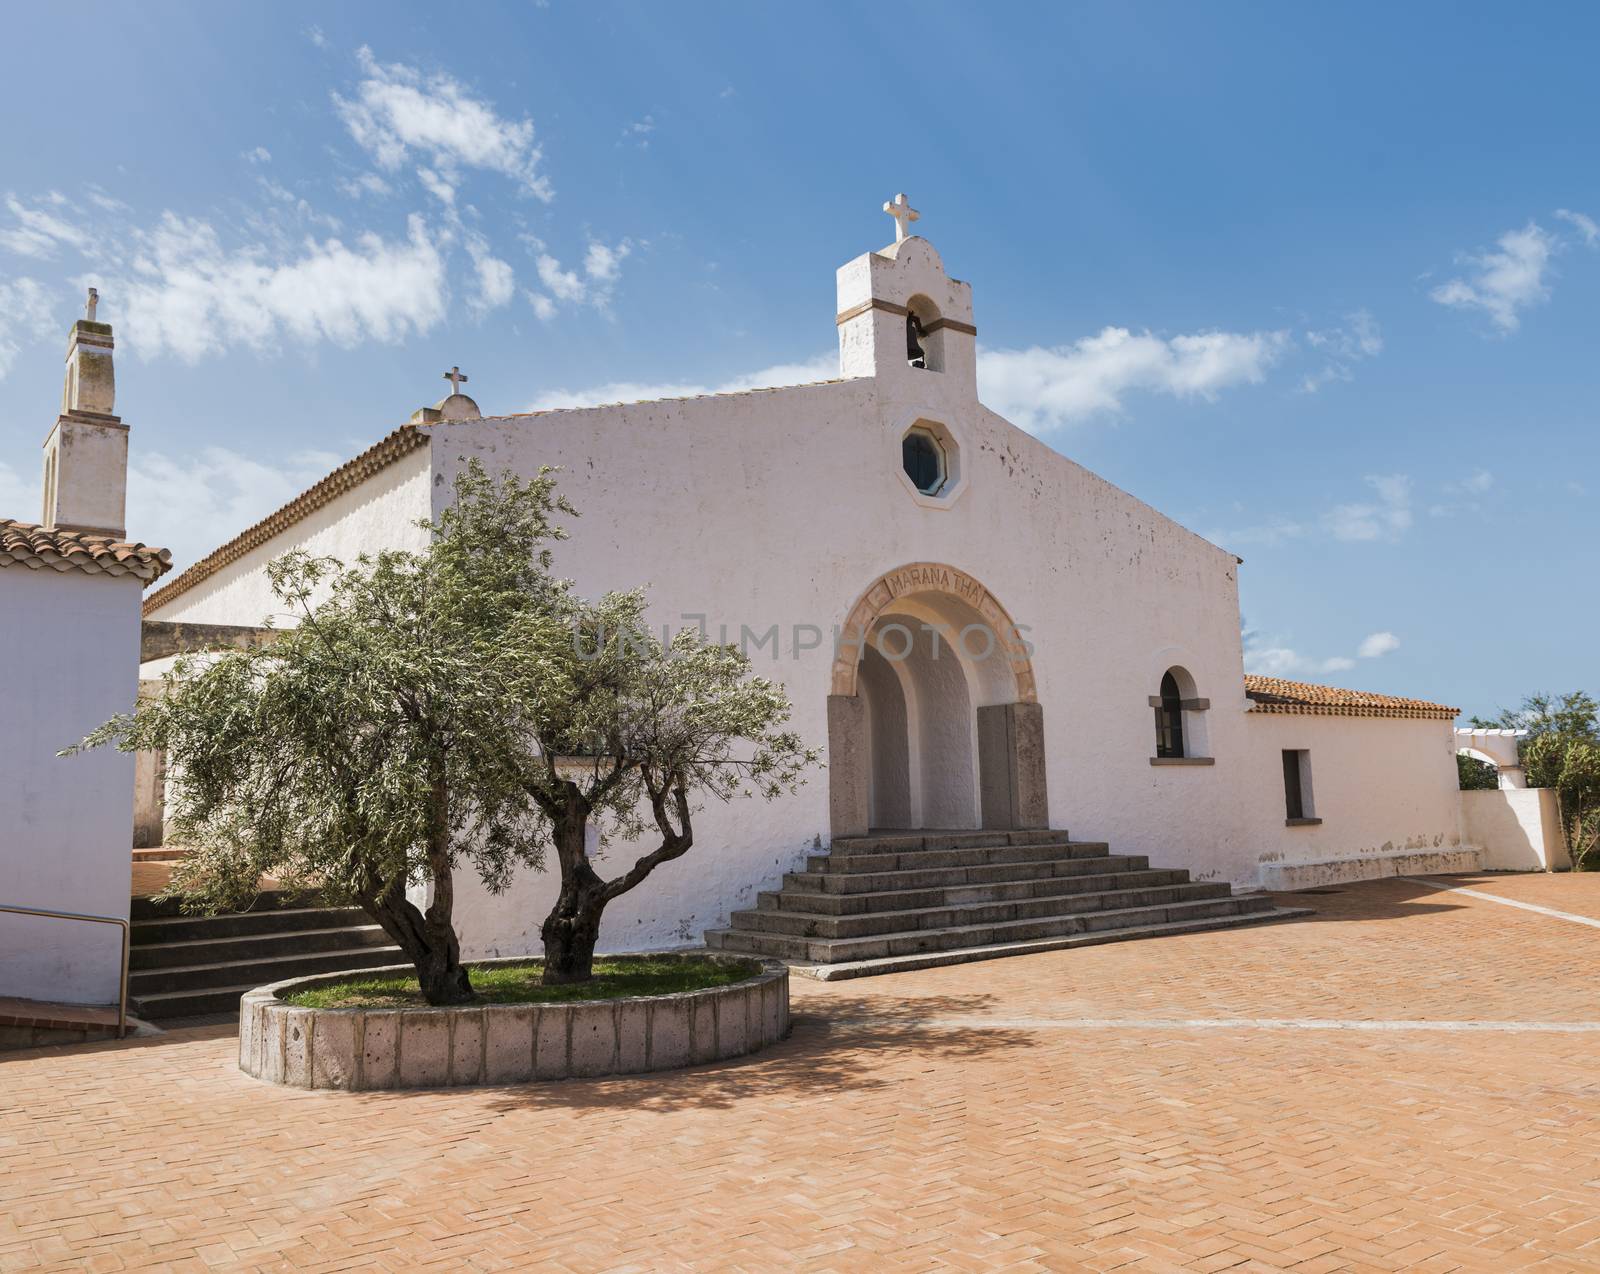 the white holy church in marinella on sardinia island with a bible made from stone